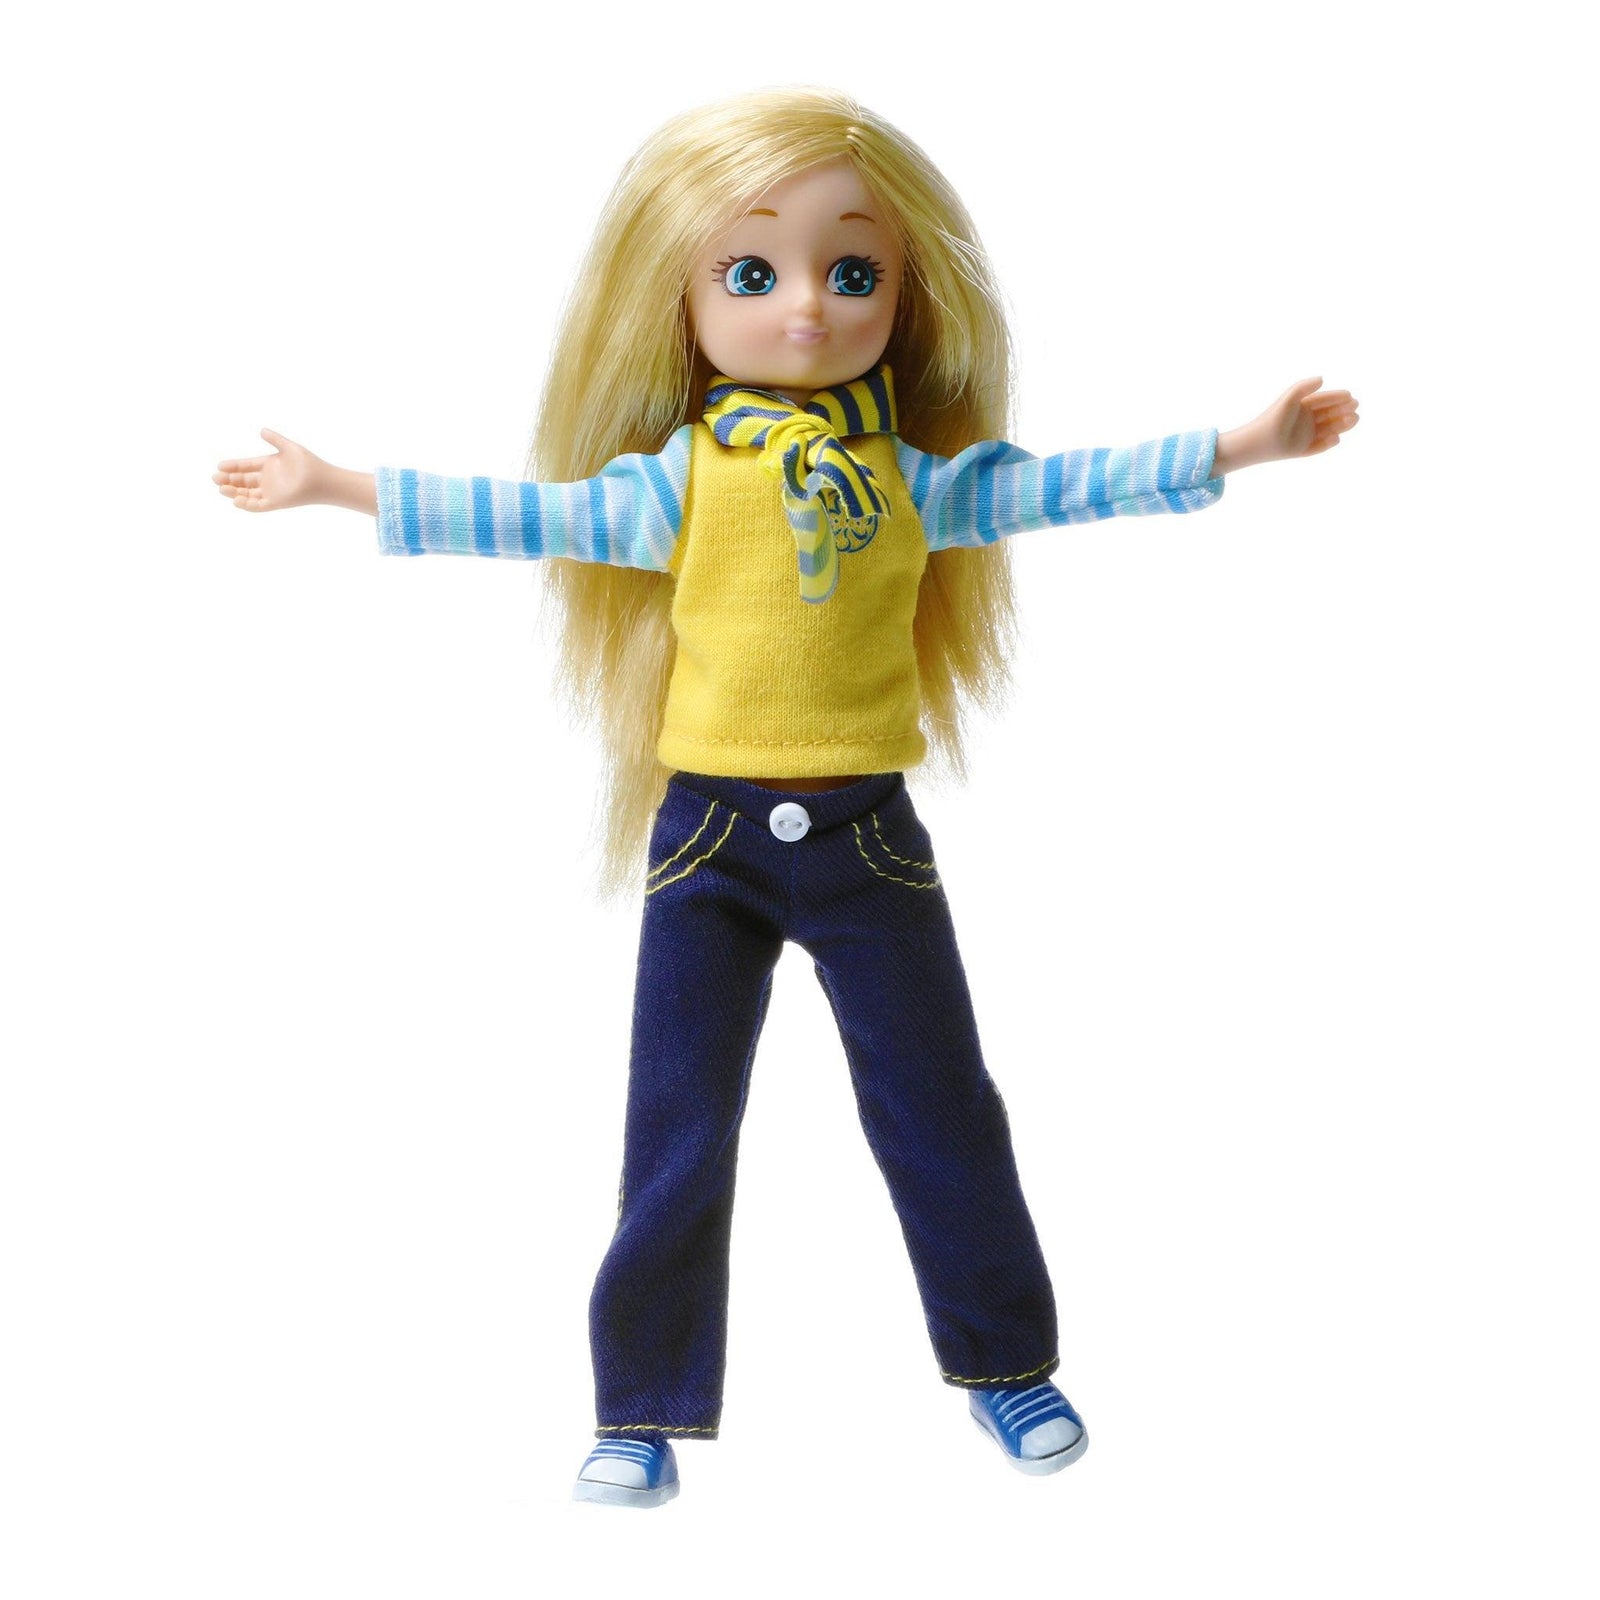 Lottie: Brownie scout doll clothes